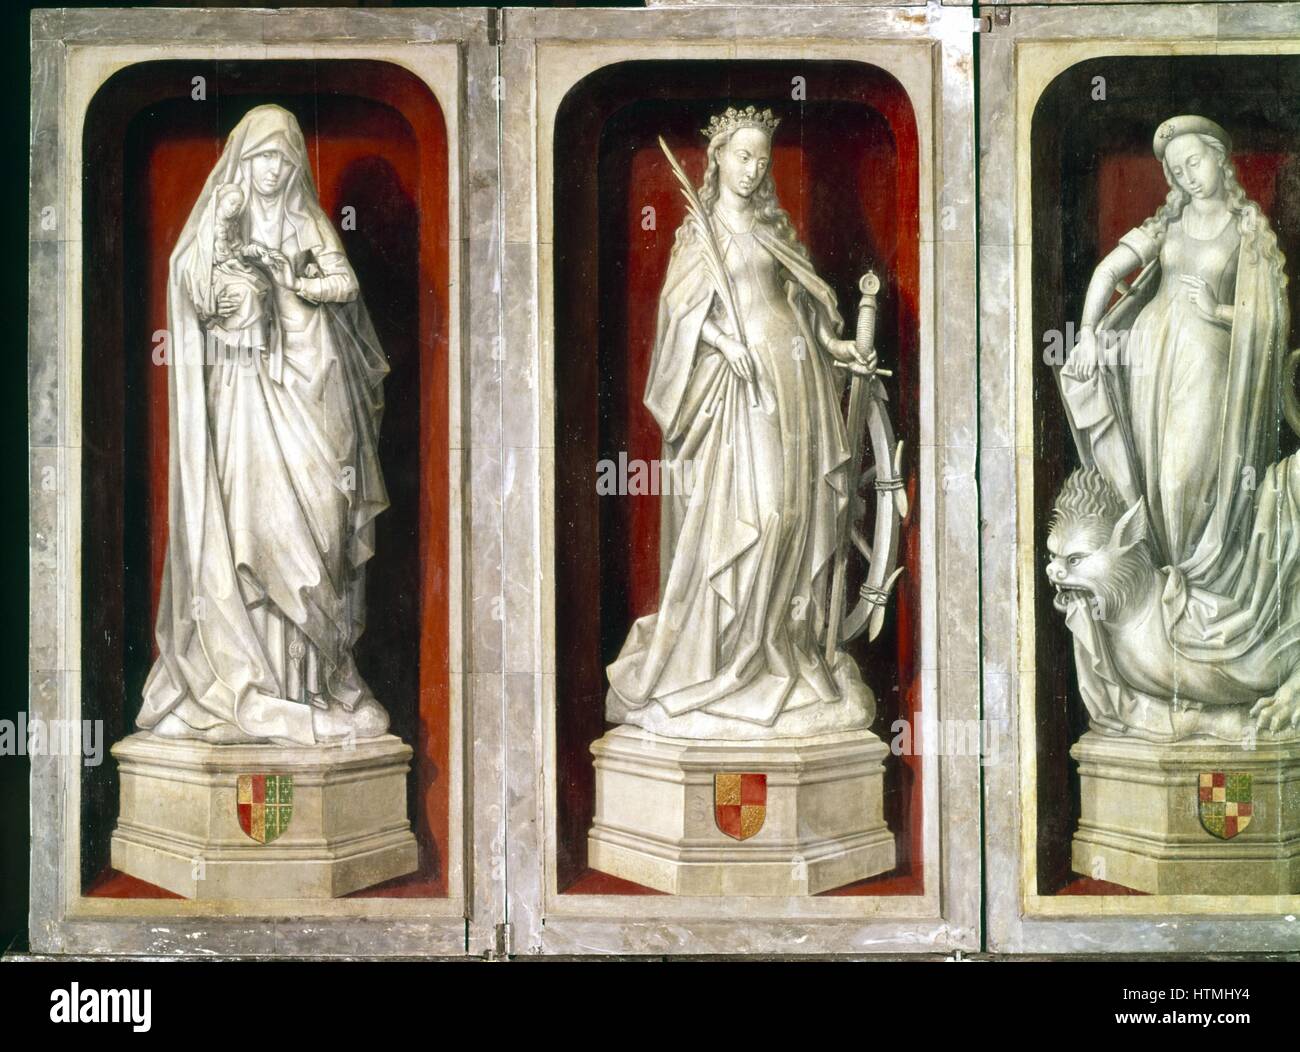 St ANNE holding her daughter Virgin Mary, St CATHERINE of Alexandria (d.307) and St MARGARET standing on Devil who visited her in prison. Marble. French school, 15th century Stock Photo